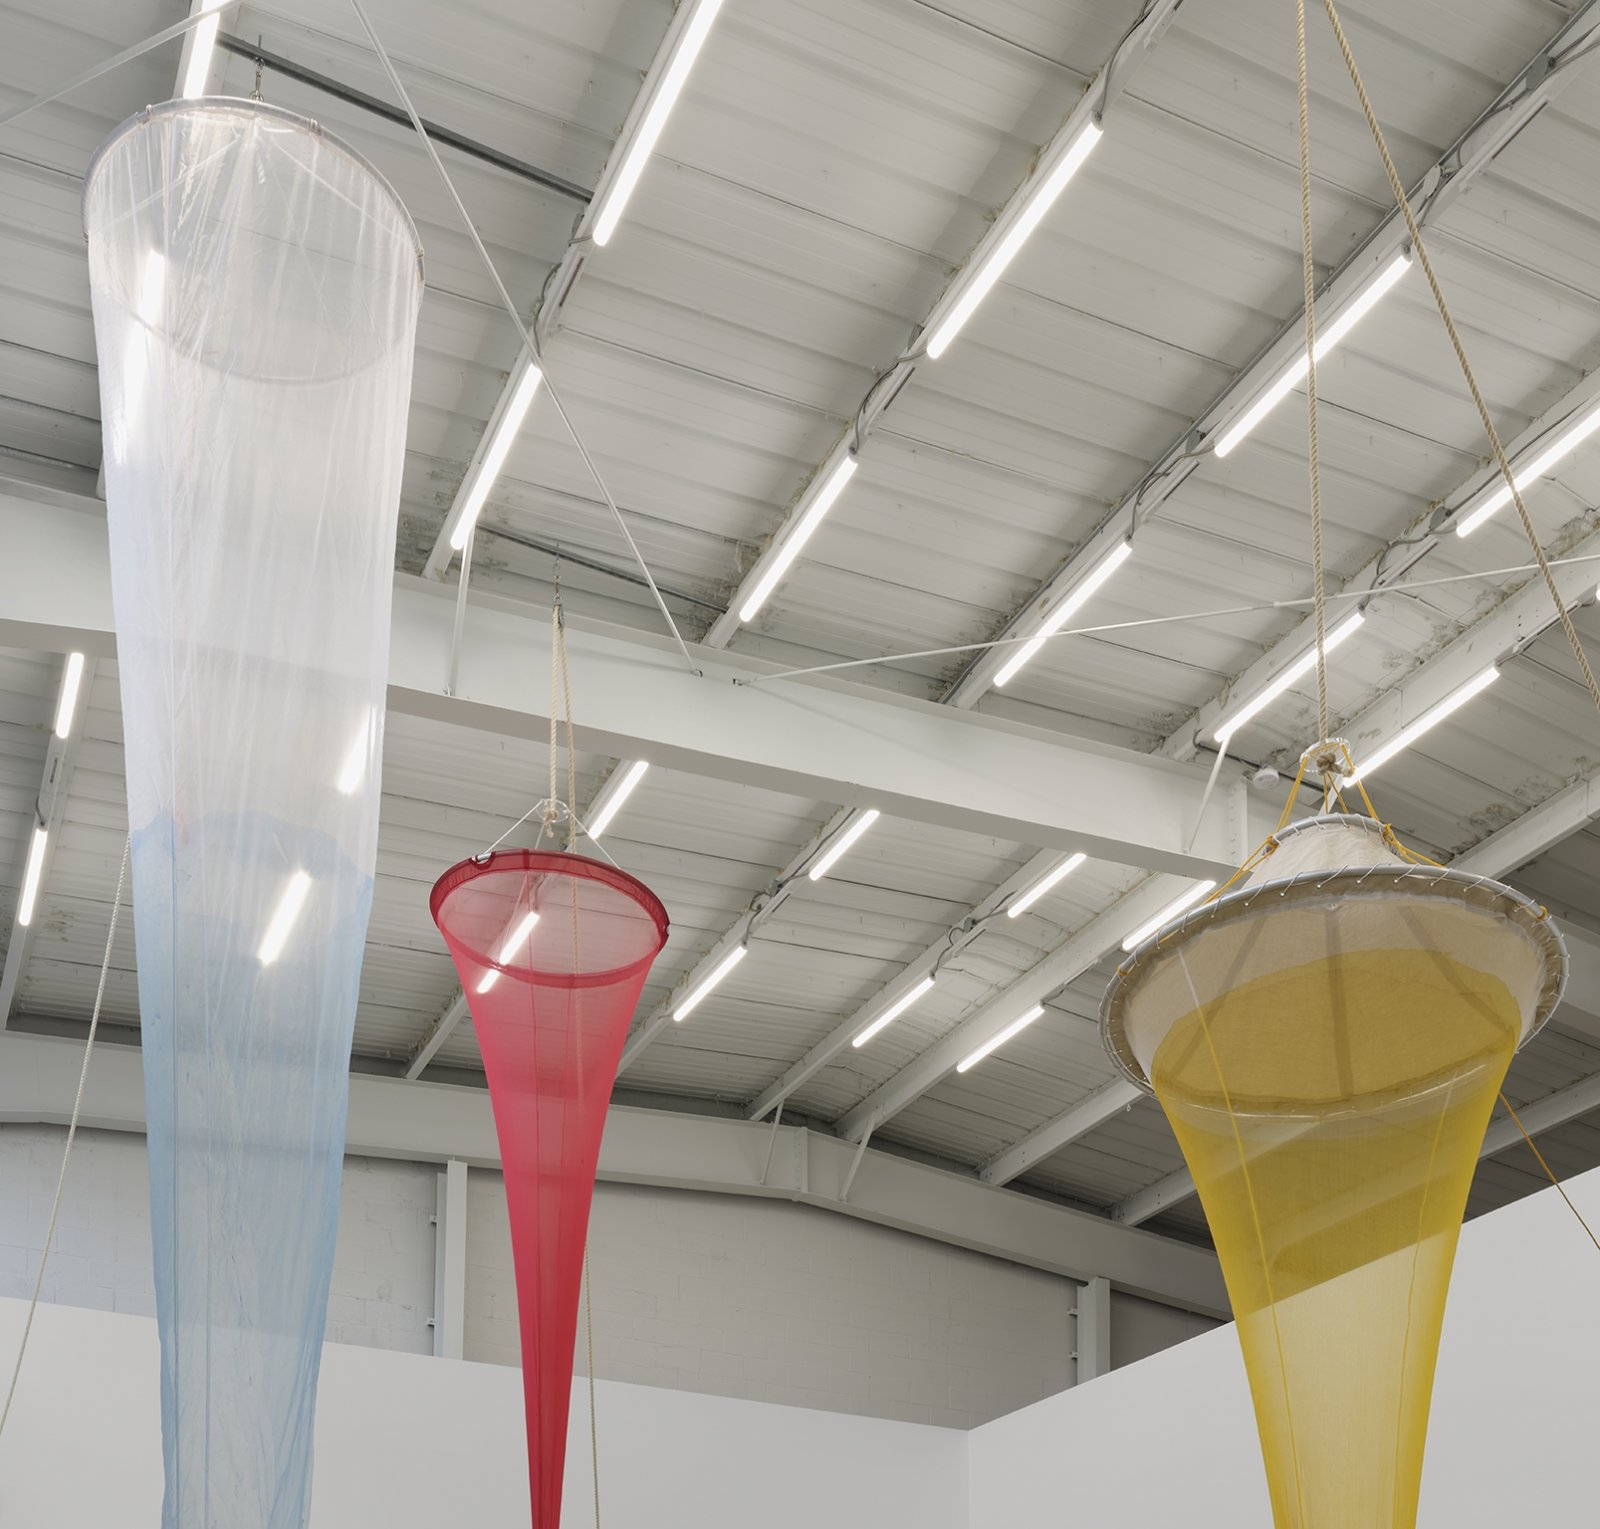 Christina Mackie, Colour Drop, 2014, silk, linen, polyester, aluminum, acrylic, manila, sisal, galvanized steel, fibreglass, gel-coated fibreglass, non-toxic water-based dye, water, worked glass, installation dimensions variable by Christina Mackie